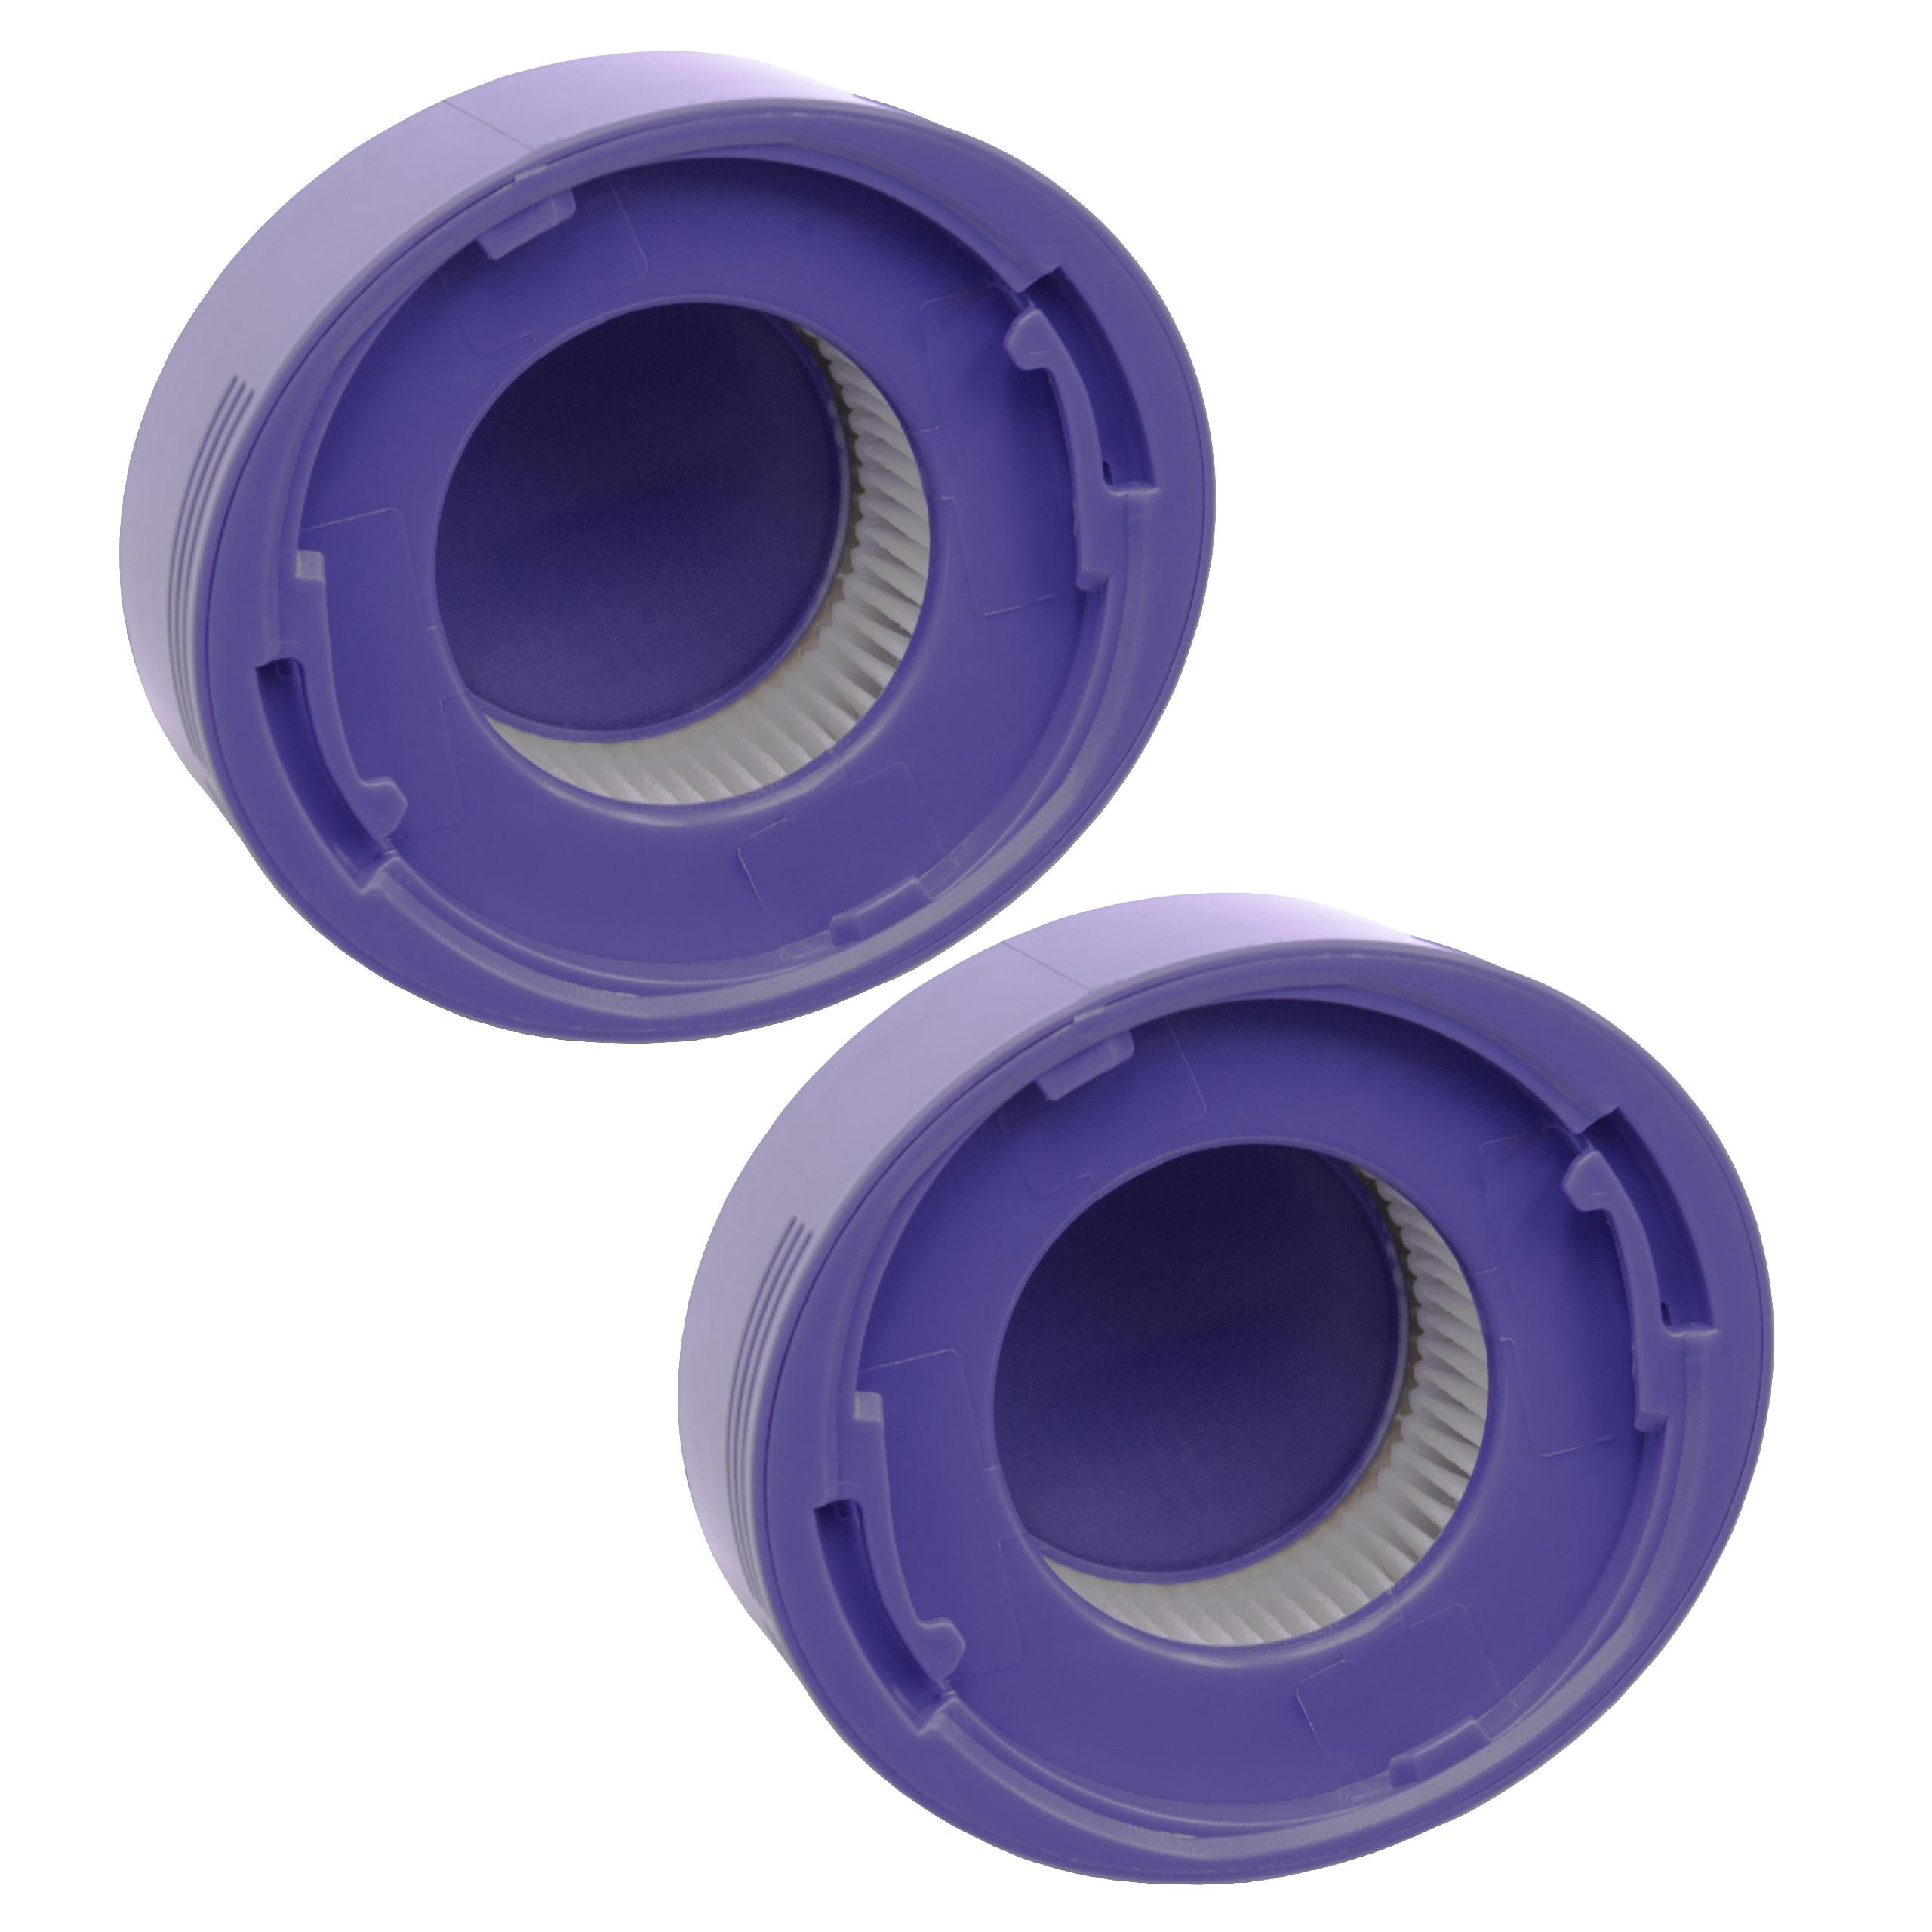 2x post-motor HEPA-filter replaces Dyson 967478-01 for Dyson Vacuum Cleaner